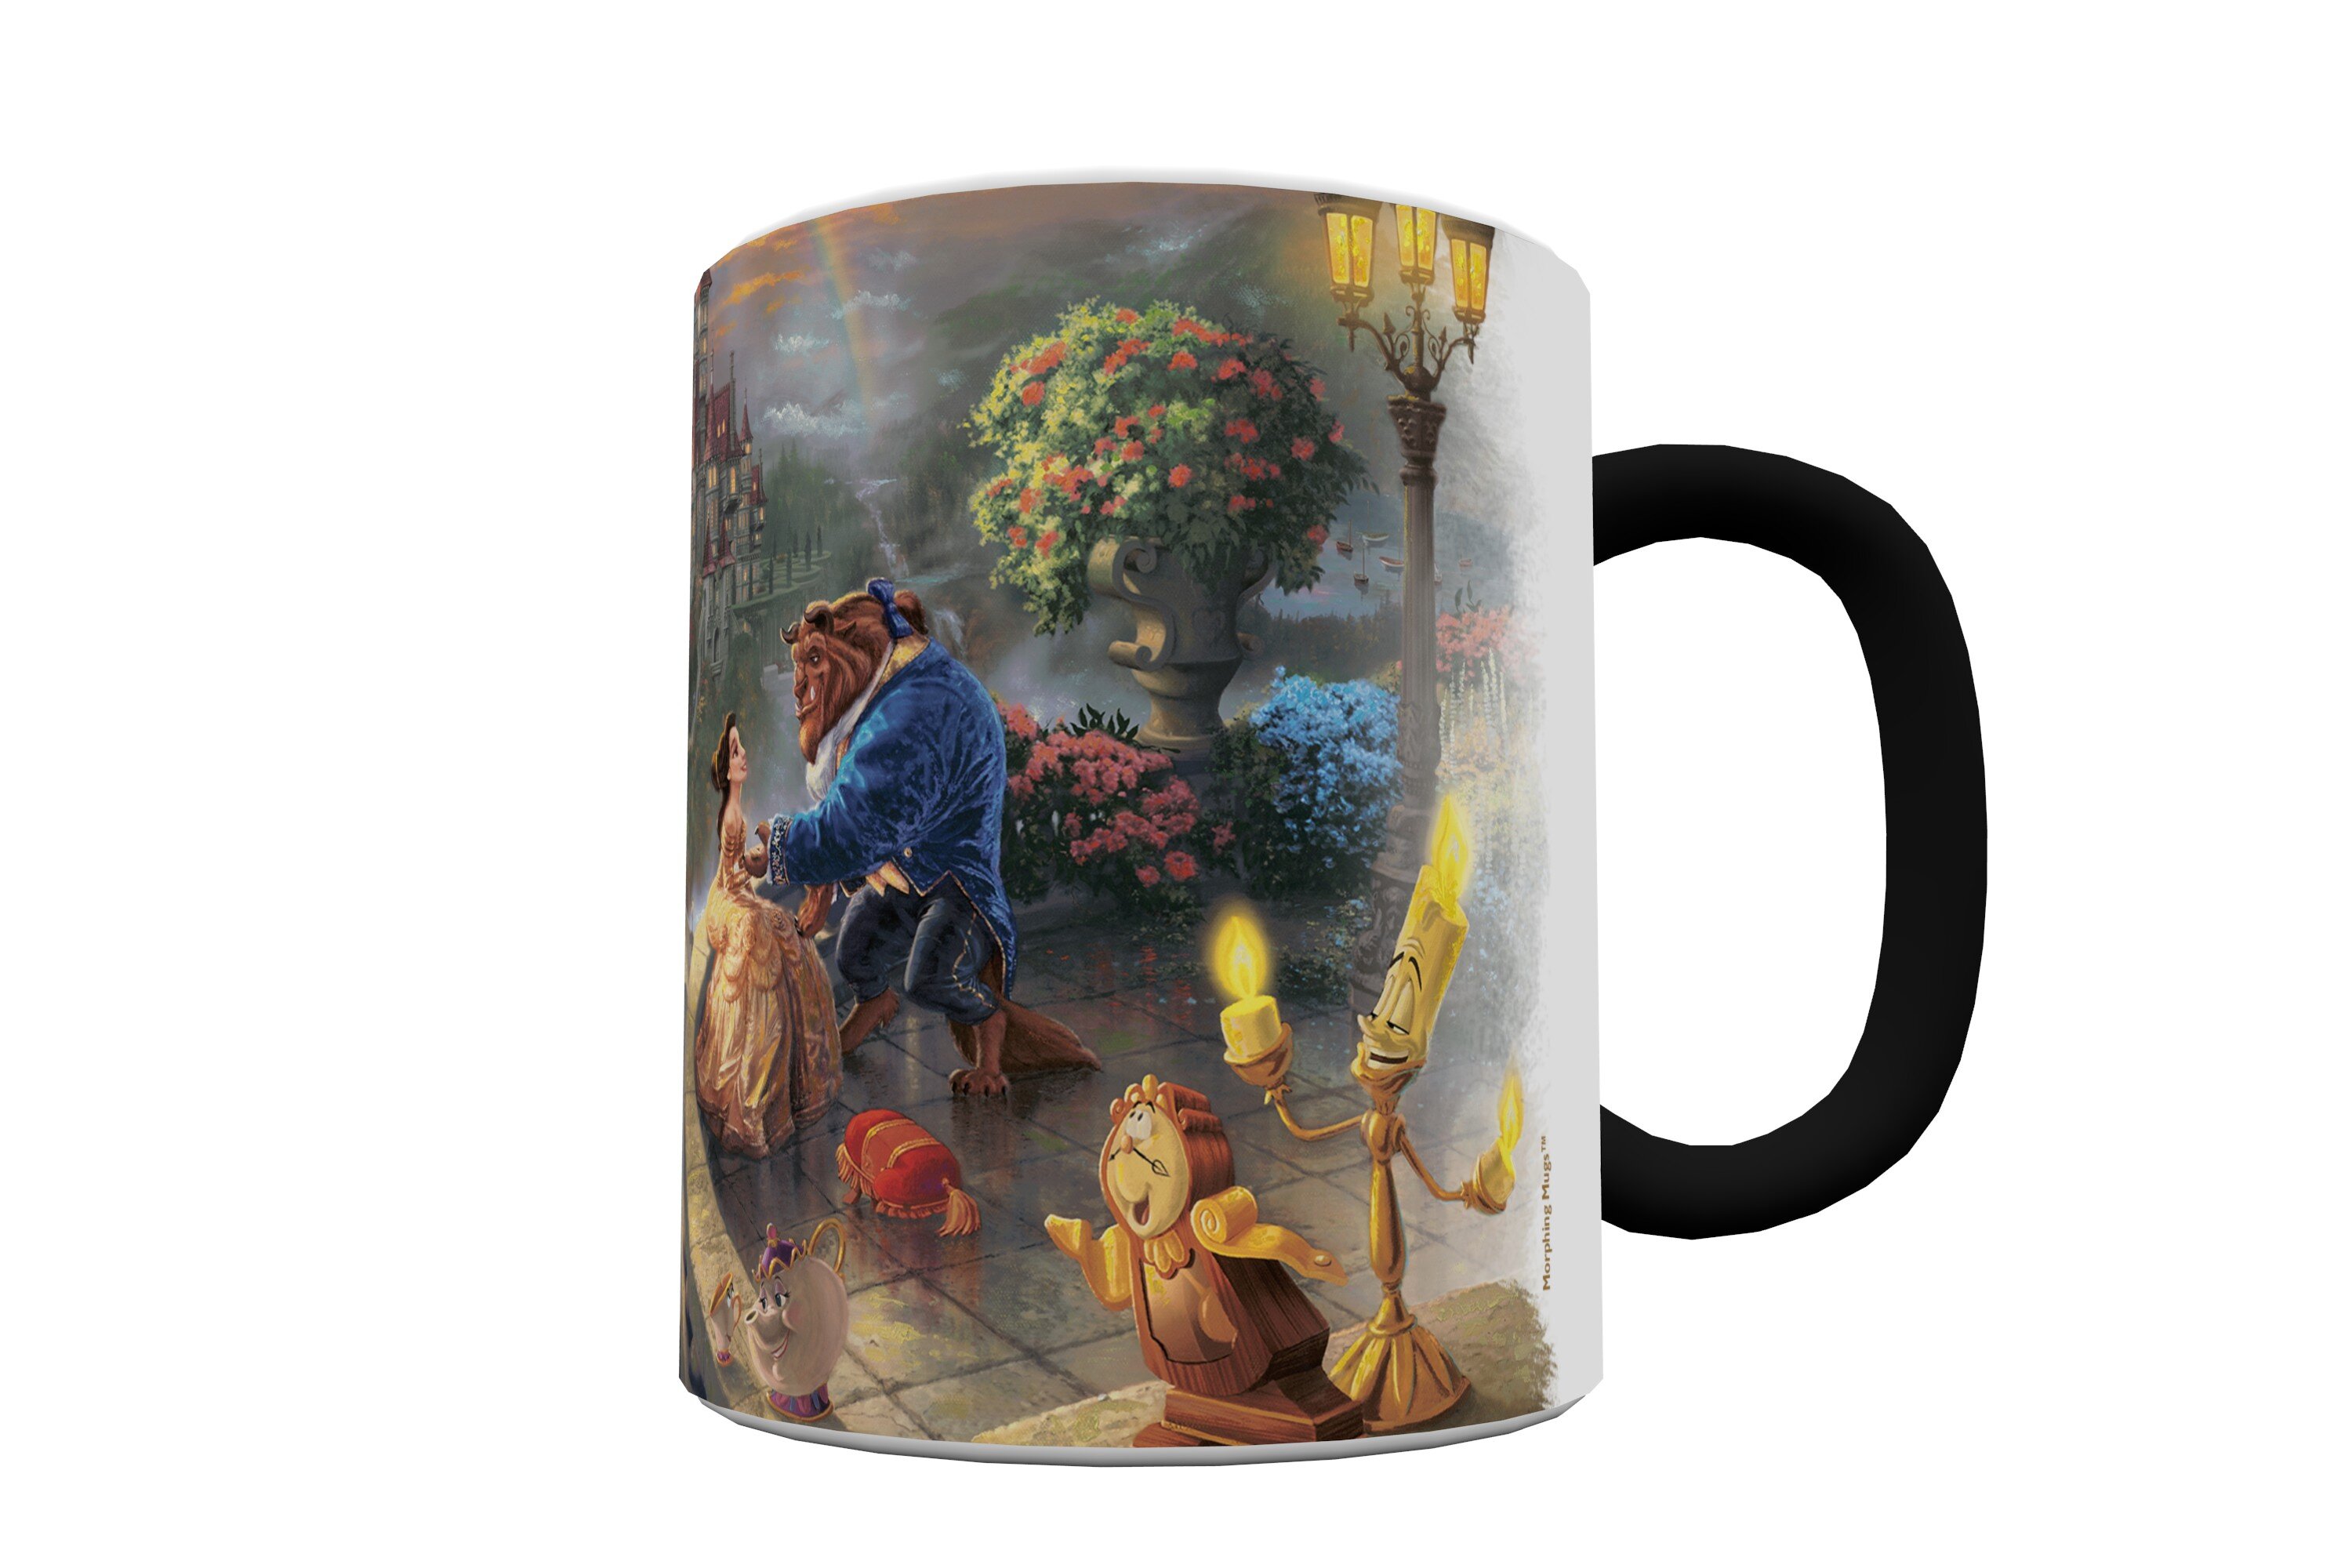 11oz Red Magic Mug. Heat Activation Coffee Mug With Your Picture, Logo, or  Text. 